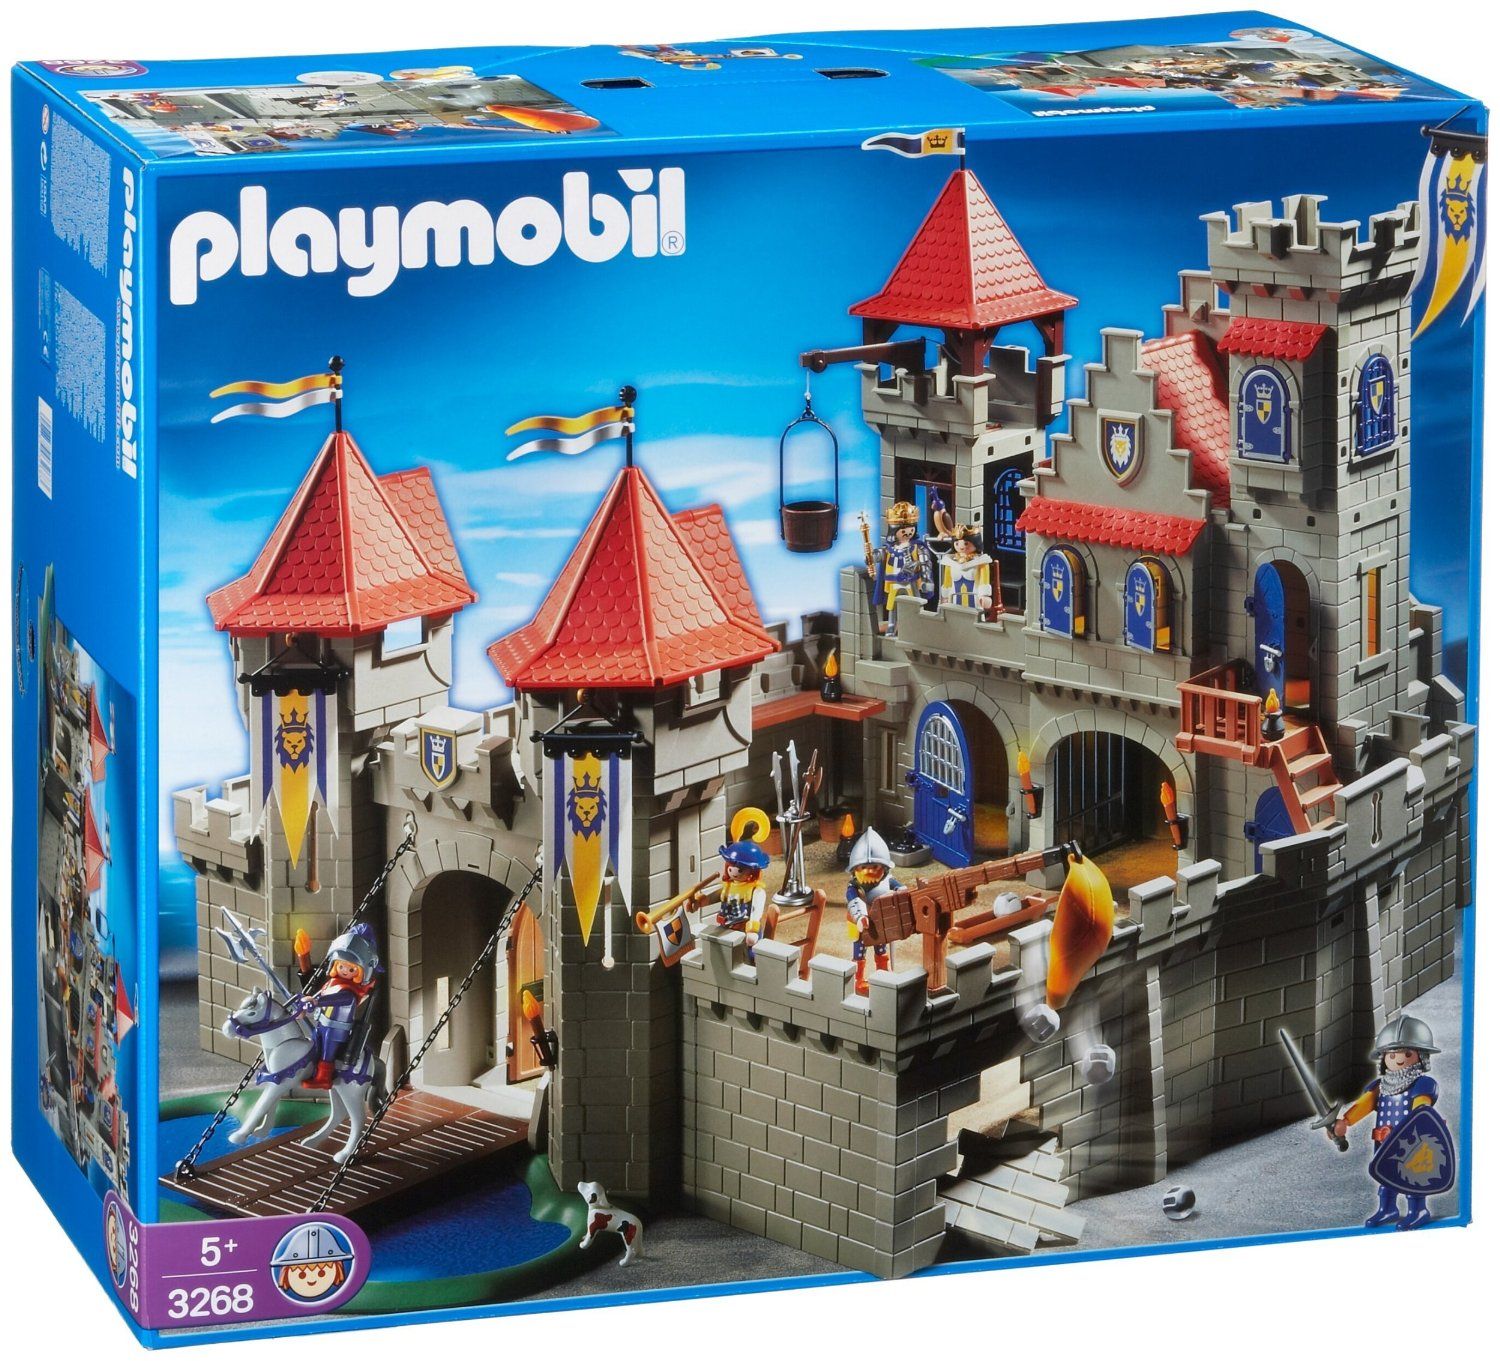 construction chateau playmobil